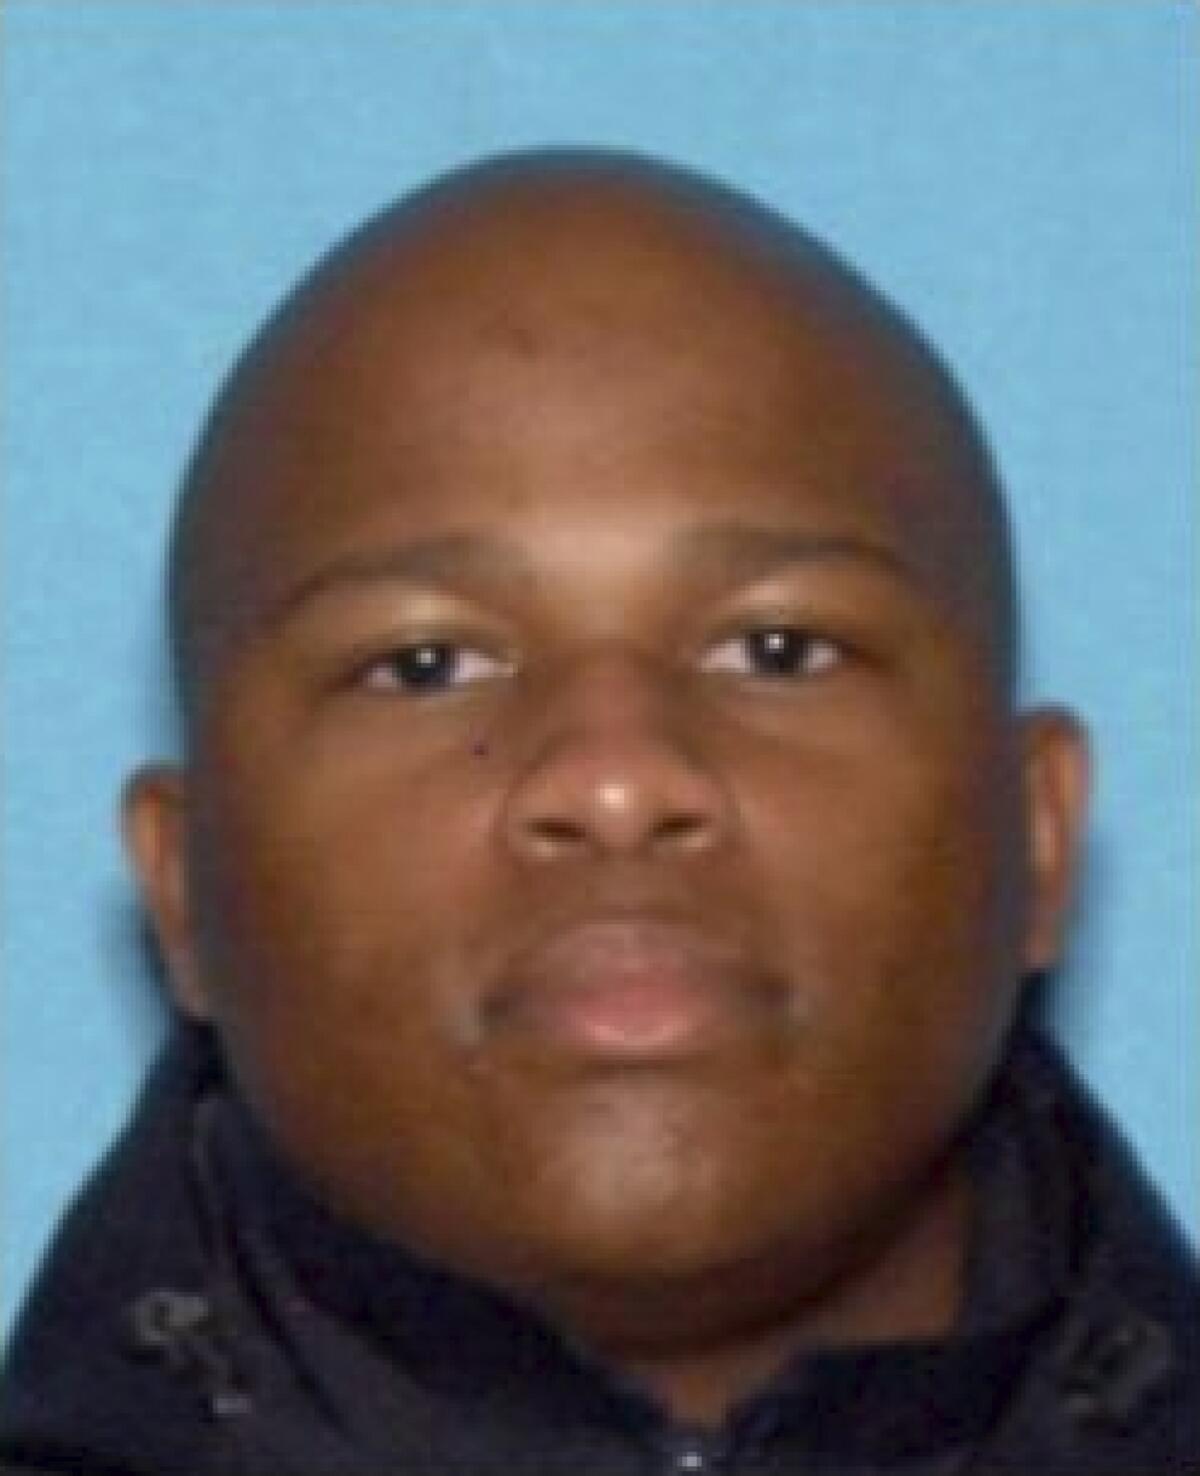 In this undated photo released by the Alameda County Sheriff's Office is Devin Williams Jr. Authorities say they are seeking Williams, a deputy with the Alameda County Sheriff's Office, in connection with the slaying of two people in Dublin, Calif., early Wednesday, Sept. 7, 2022. He is considered to be armed and dangerous. (Alameda County Sheriff's Office via AP)